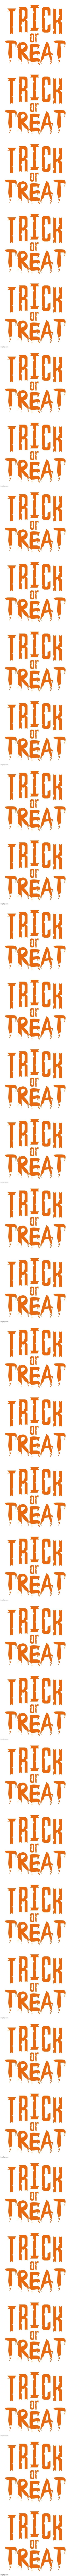 HAPPY HALLOWEEN IMGFLIP!!! :) | image tagged in trick or treat | made w/ Imgflip meme maker